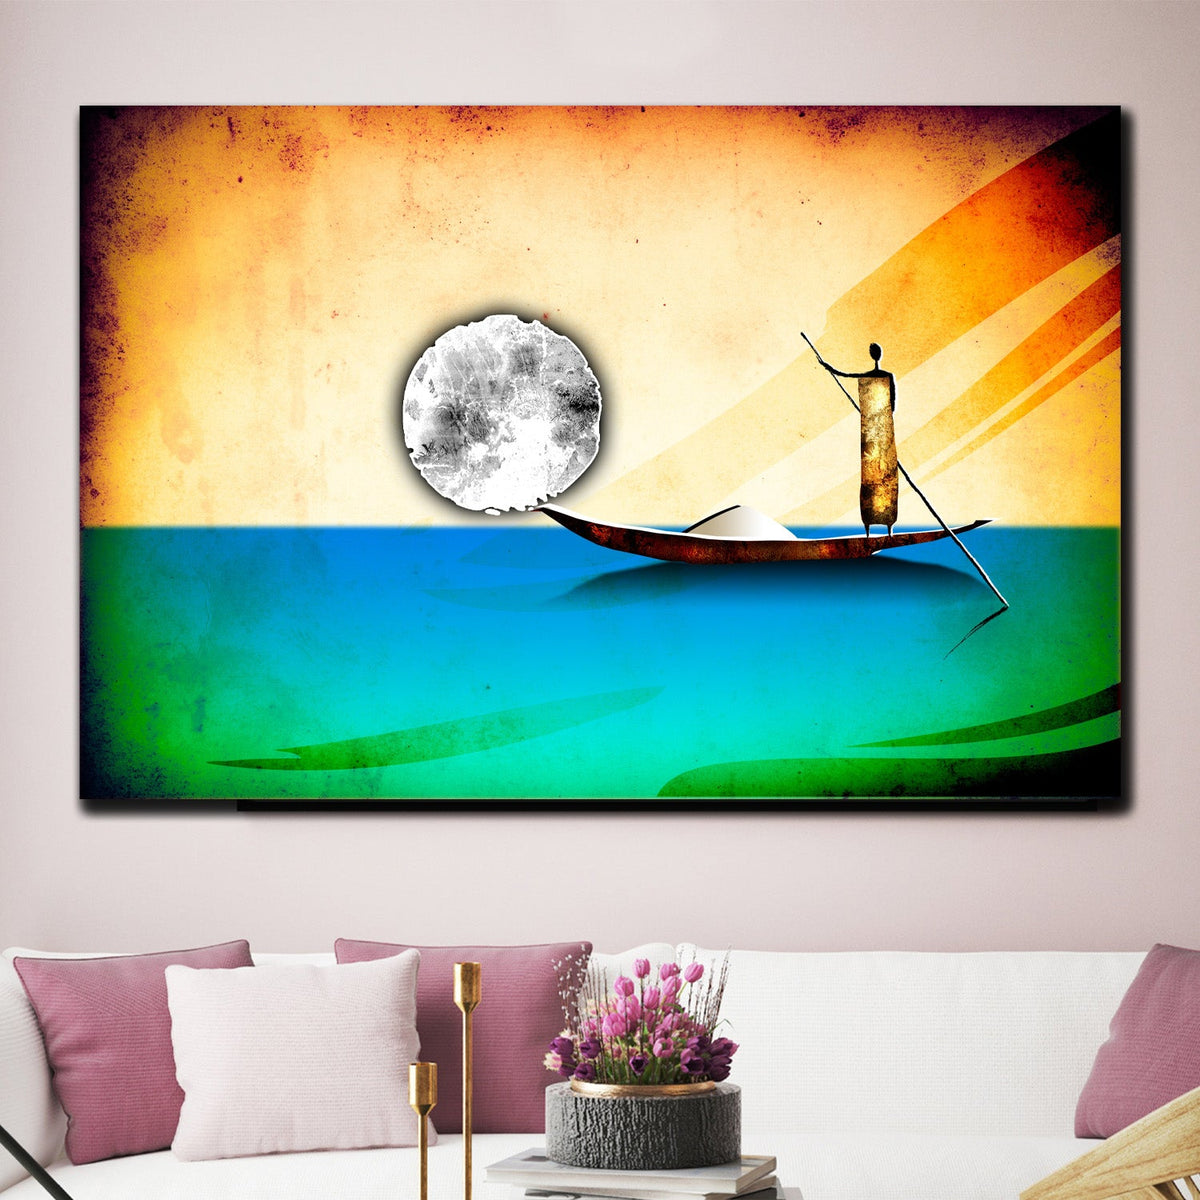 https://cdn.shopify.com/s/files/1/0387/9986/8044/products/TheBoatmanCanvasArtprintStretched-2.jpg